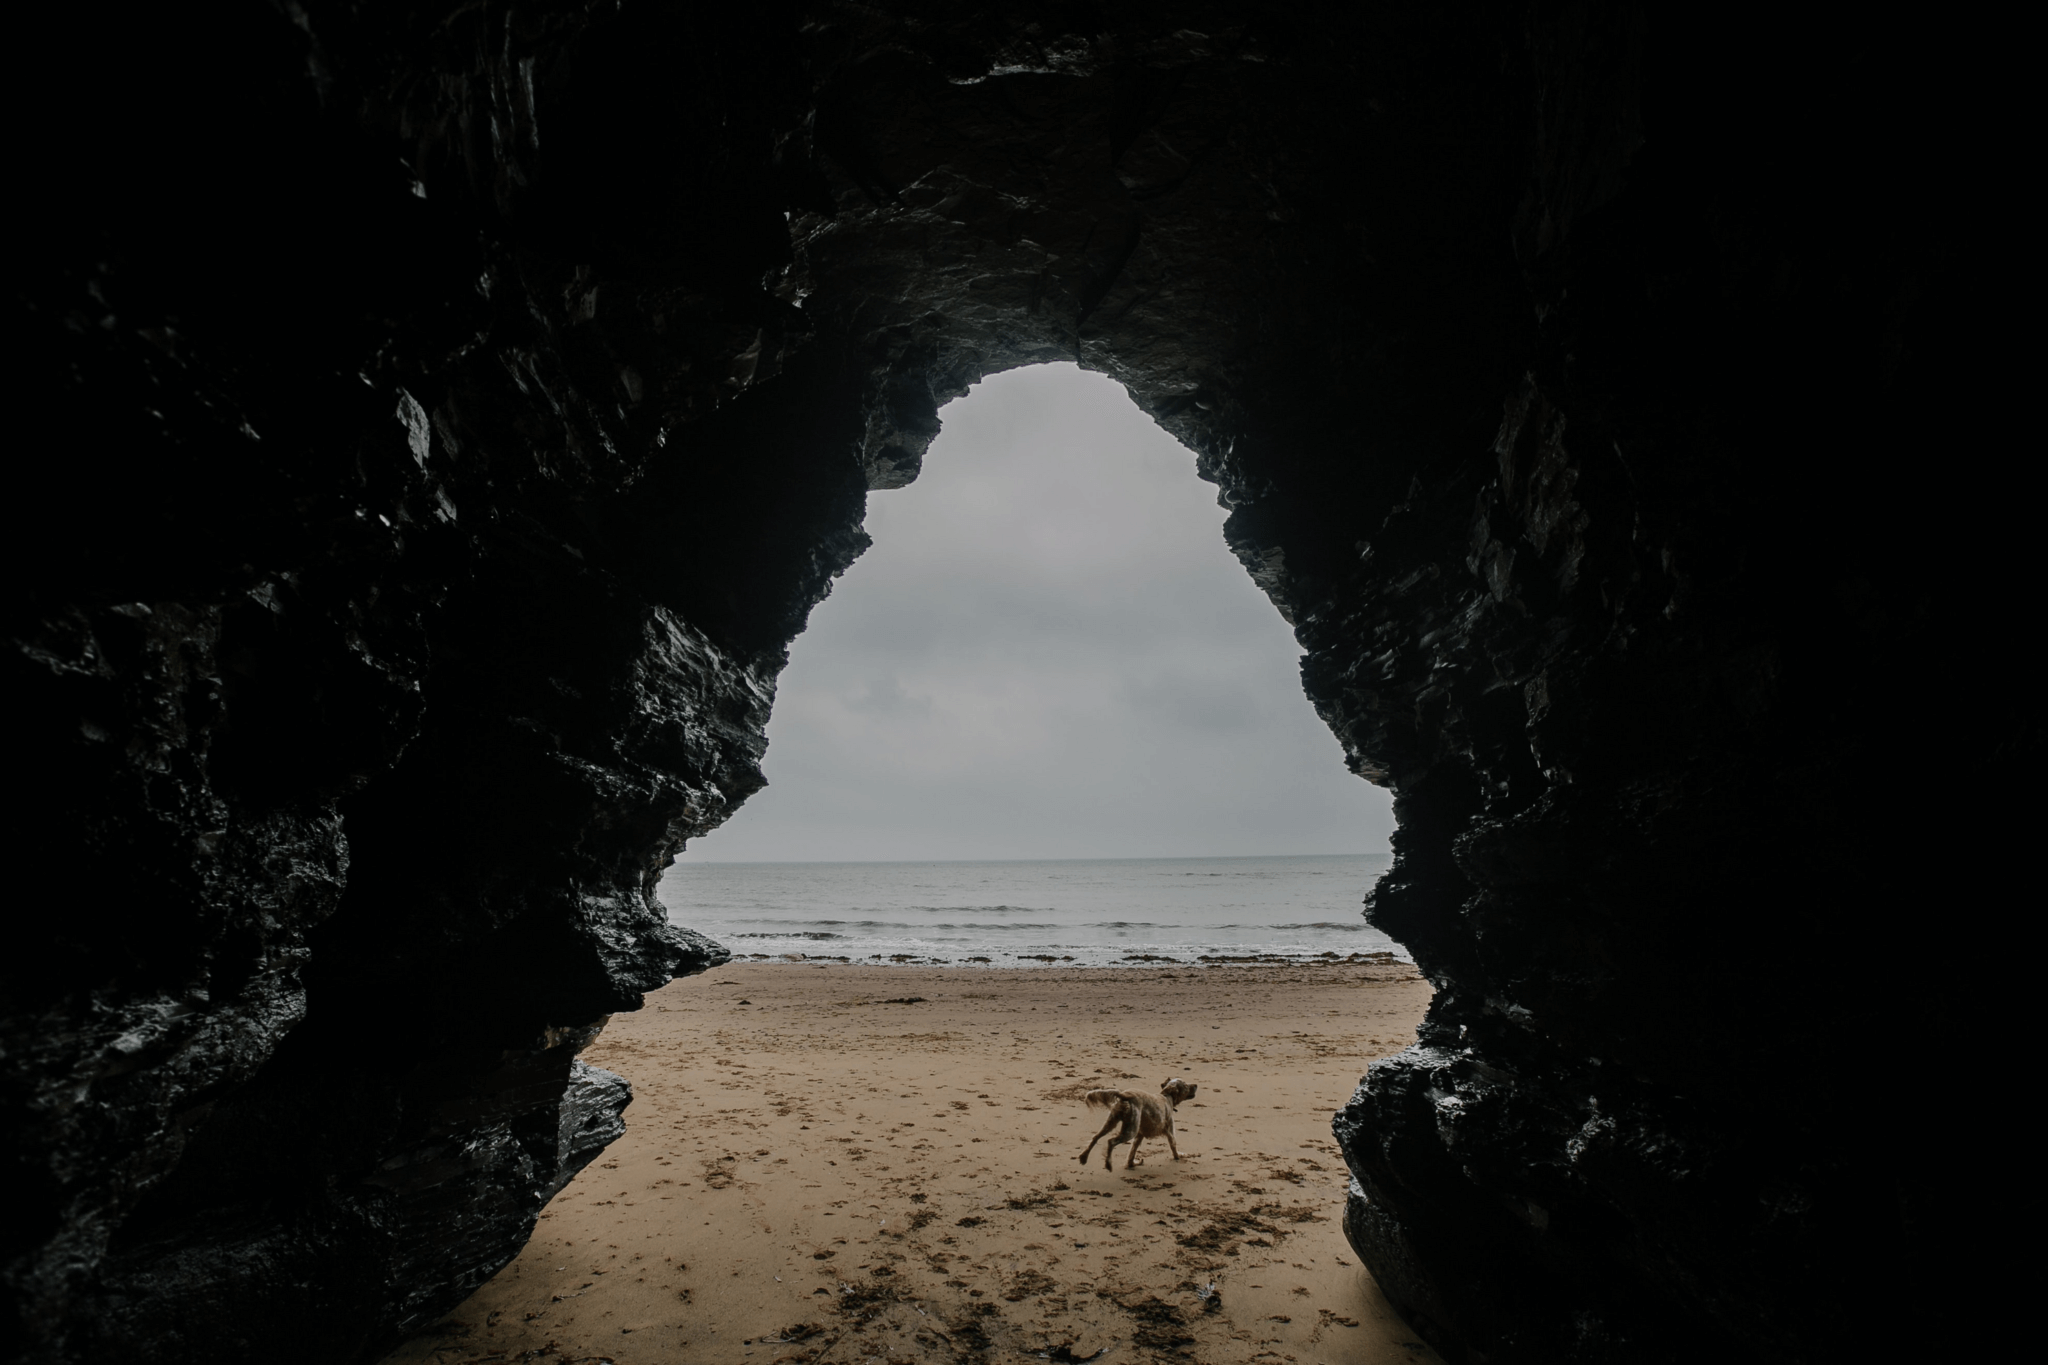 sandy beach and cave image